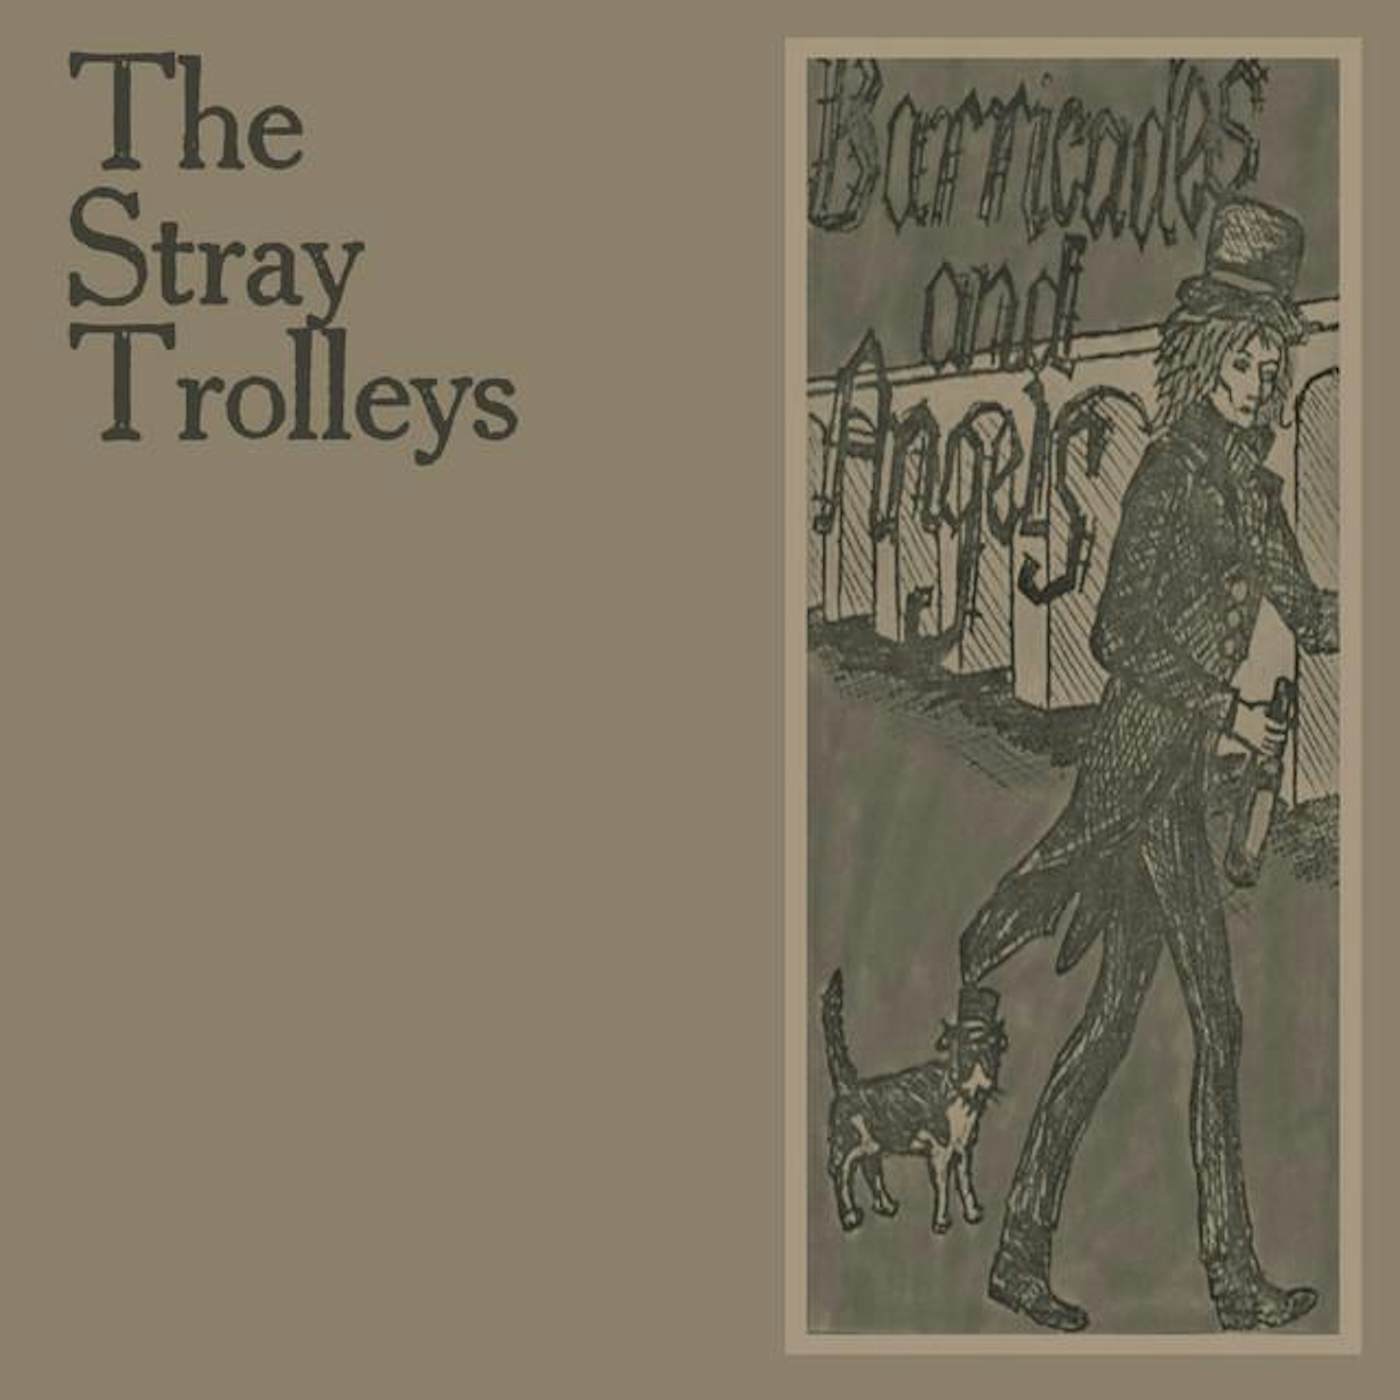 The Stray Trolleys